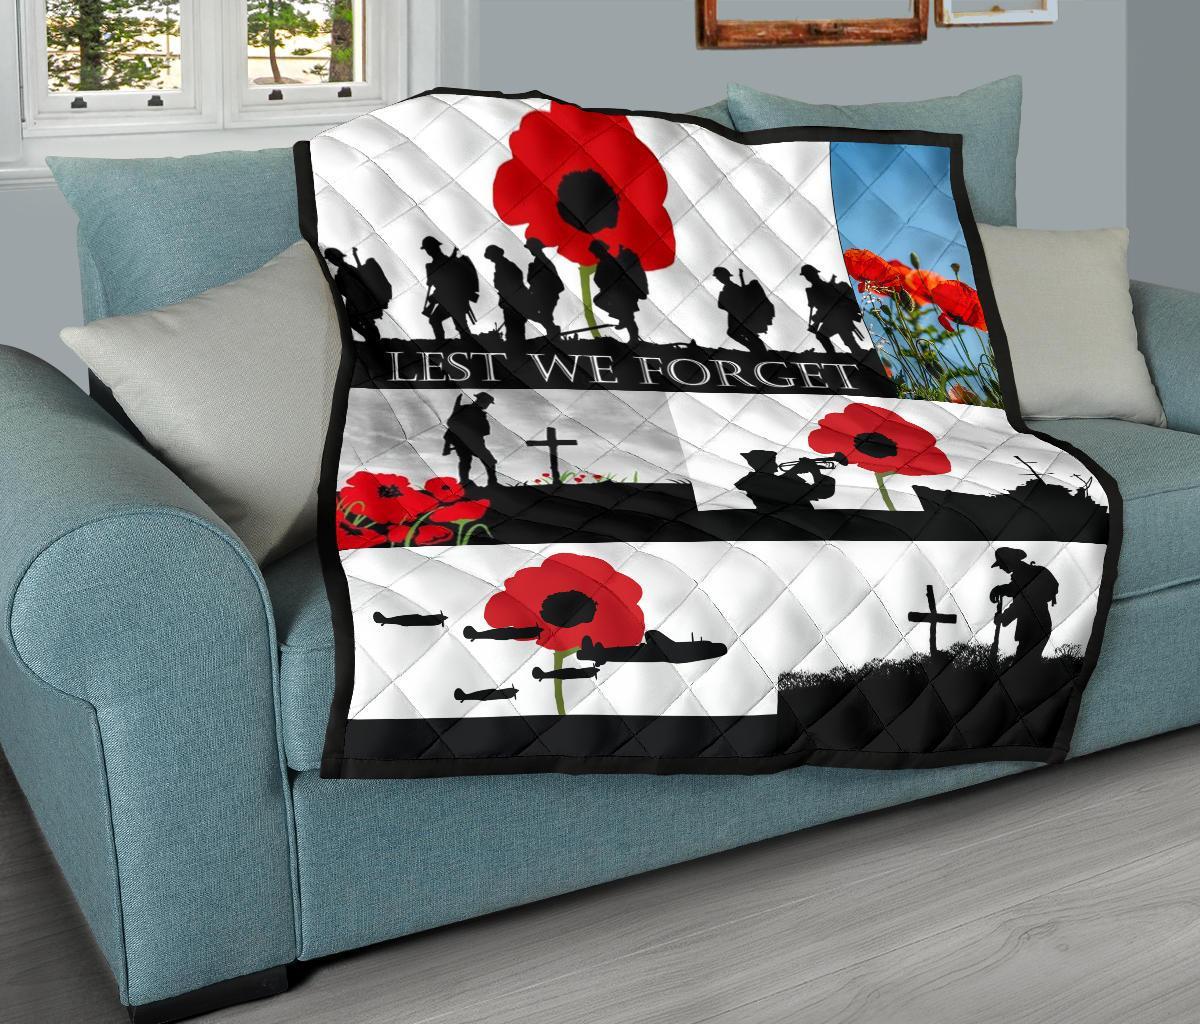 The canadian veterans lest we forget quilt 3